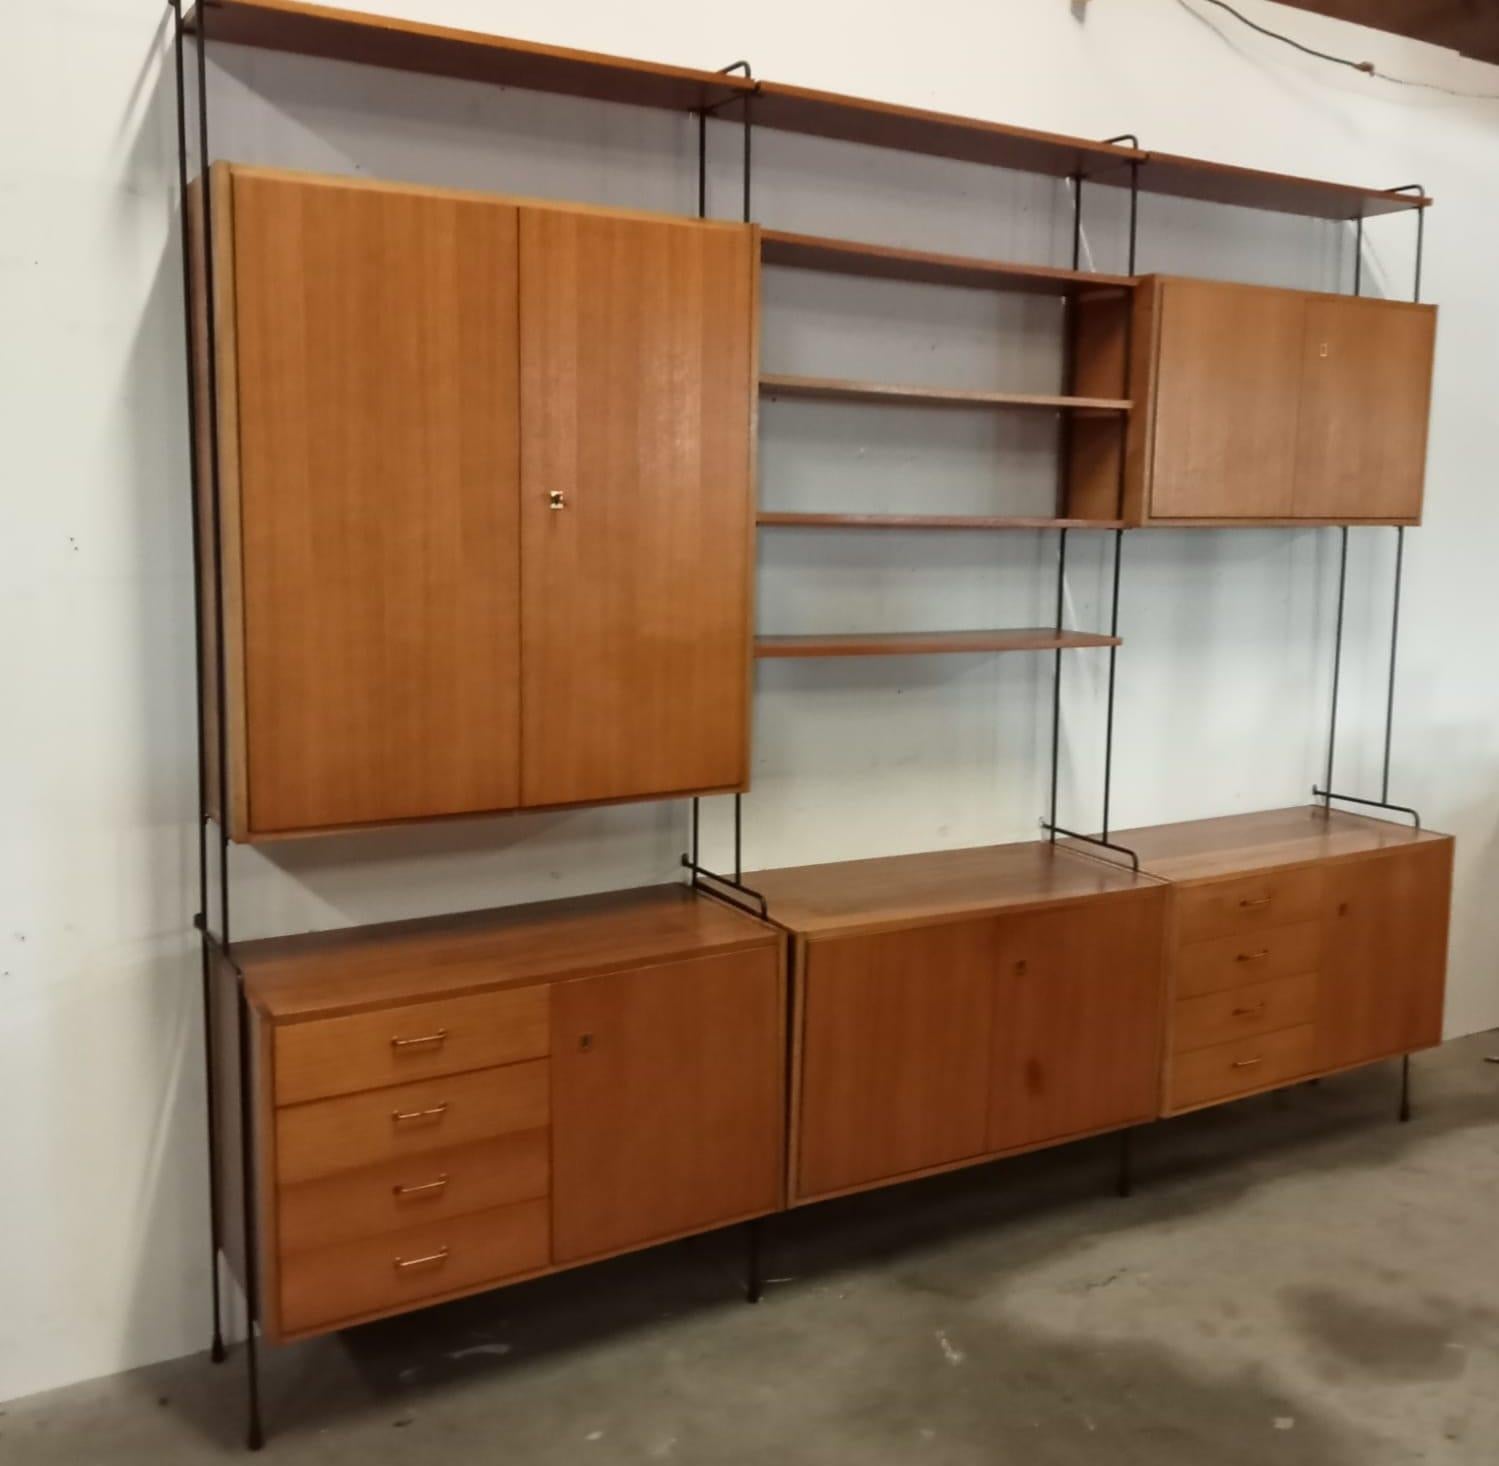 Mid century wall unit in designed by Ersnt Dieter Hilker model 'Omnia'.

The wall unit is completely modular.

Good condition with normal age related wear. 

1960s - Germany

Height: 222cm/87.40